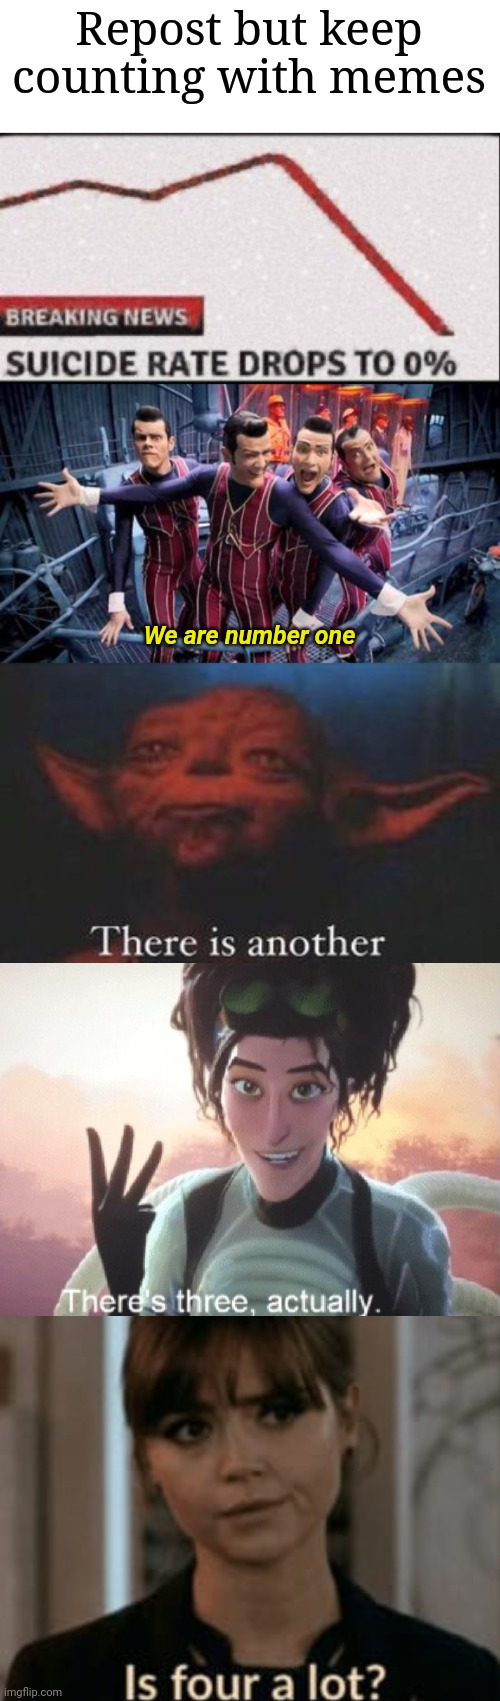 How High Can We Get??? | Repost but keep counting with memes; We are number one | image tagged in suicide rate drops to zero,we are number one,yoda there is another,there's three actually,is four a lot,memes | made w/ Imgflip meme maker